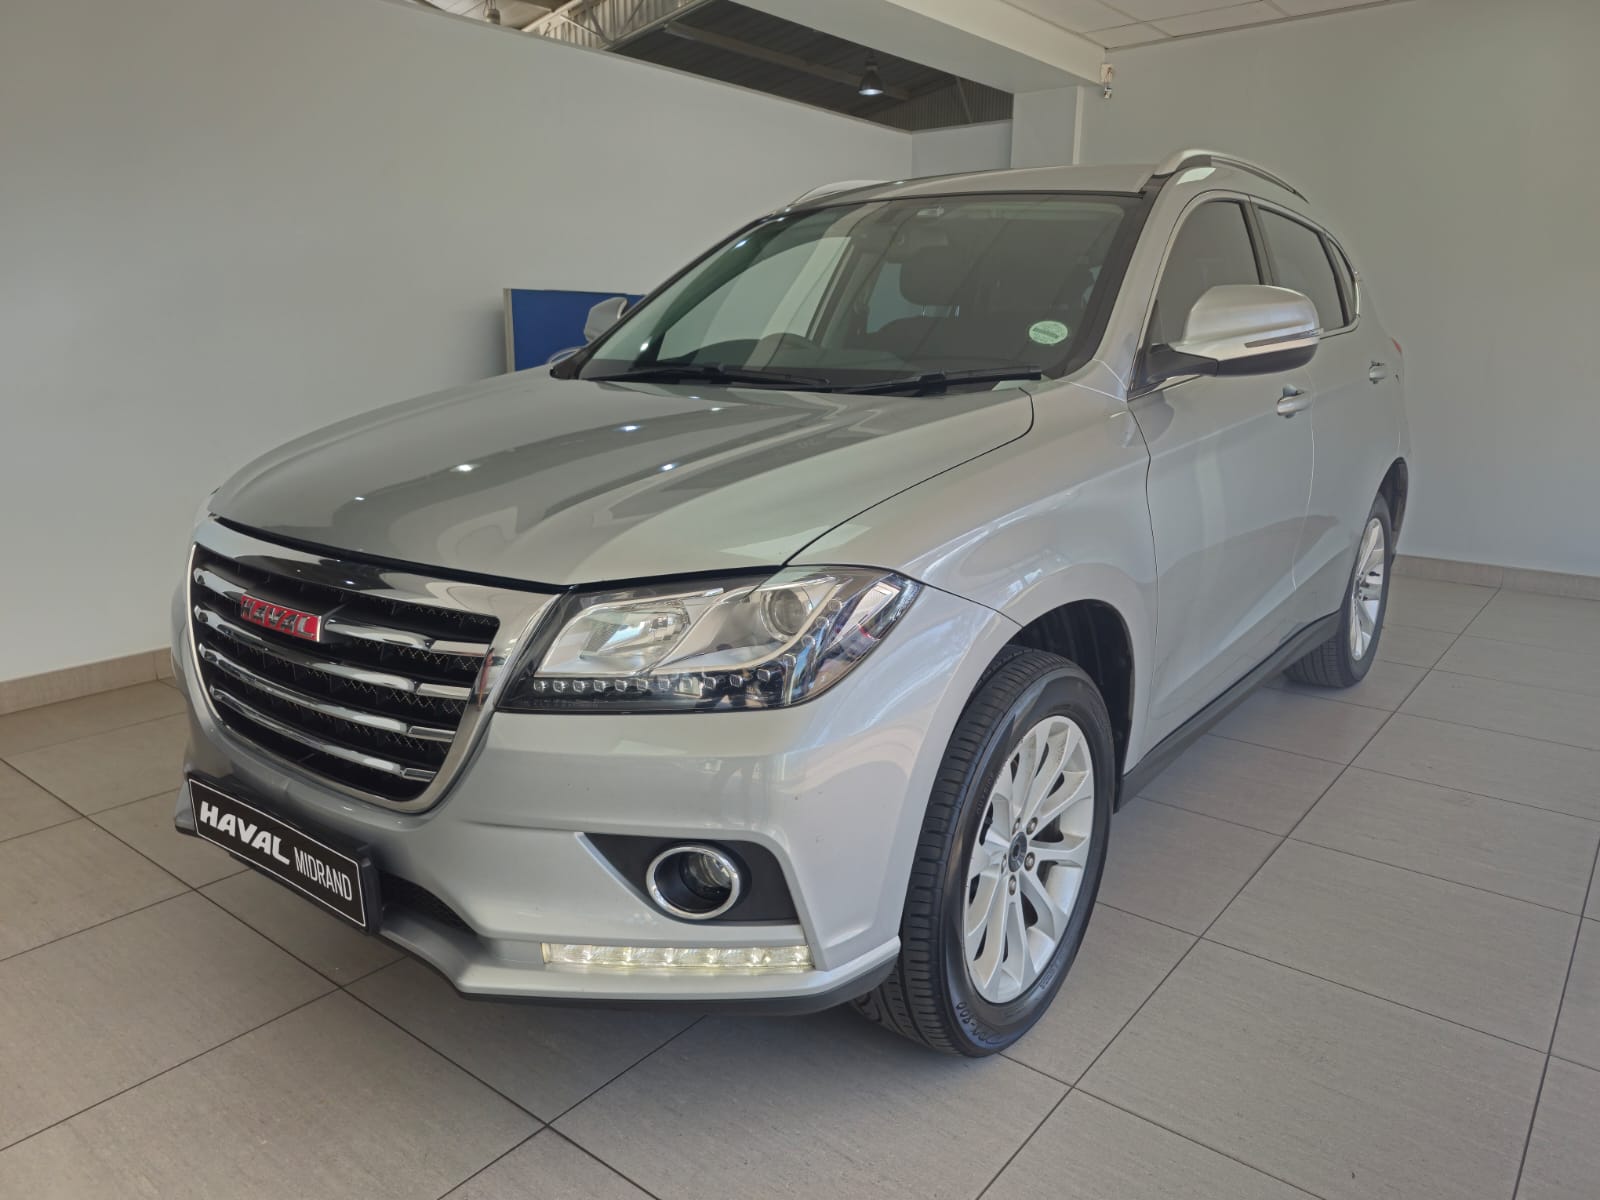 2019 Haval H2  for sale - UH70458